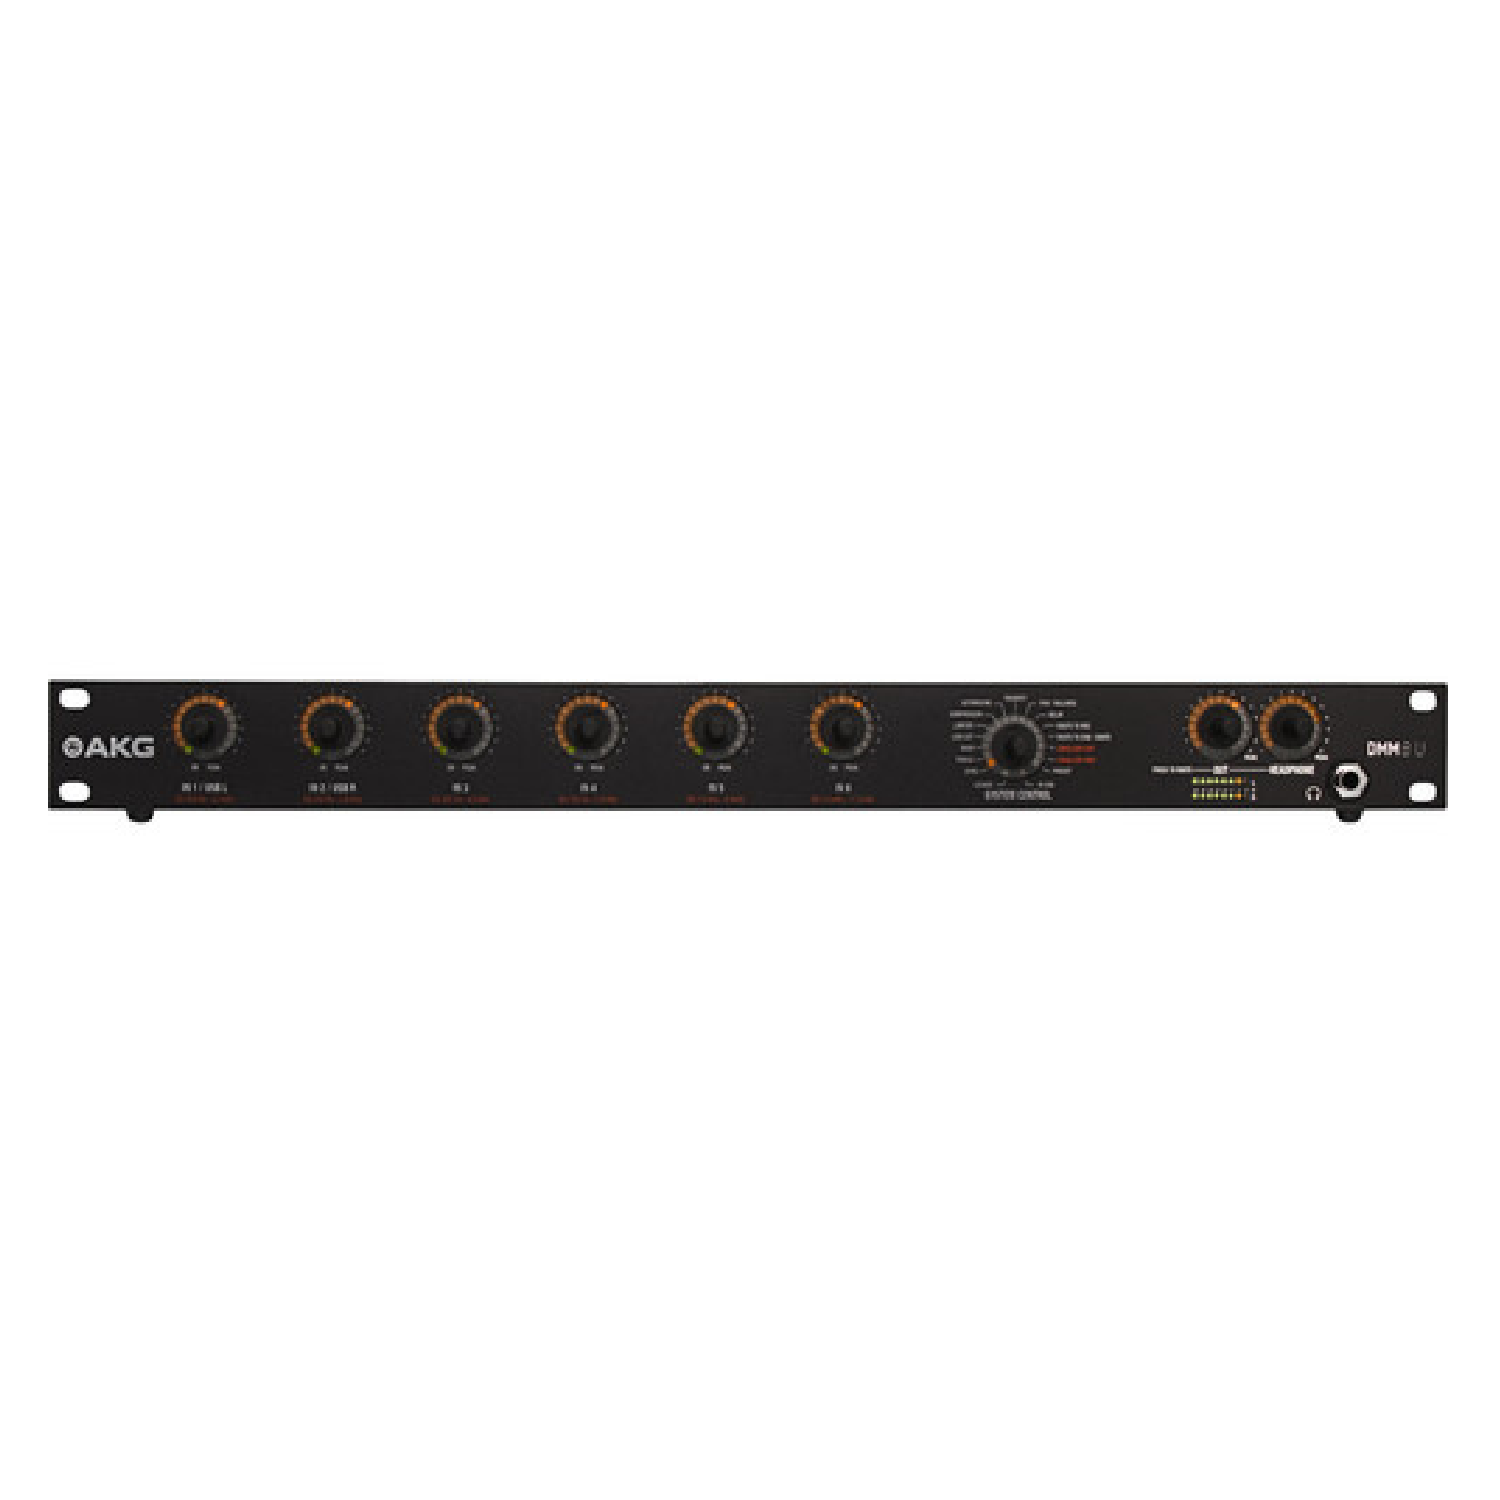 DSP up to 80 Channels, 2 Channel USB Streaming In and Out Reference Digital Automatic Microphone Mixer   DMM8 U akg